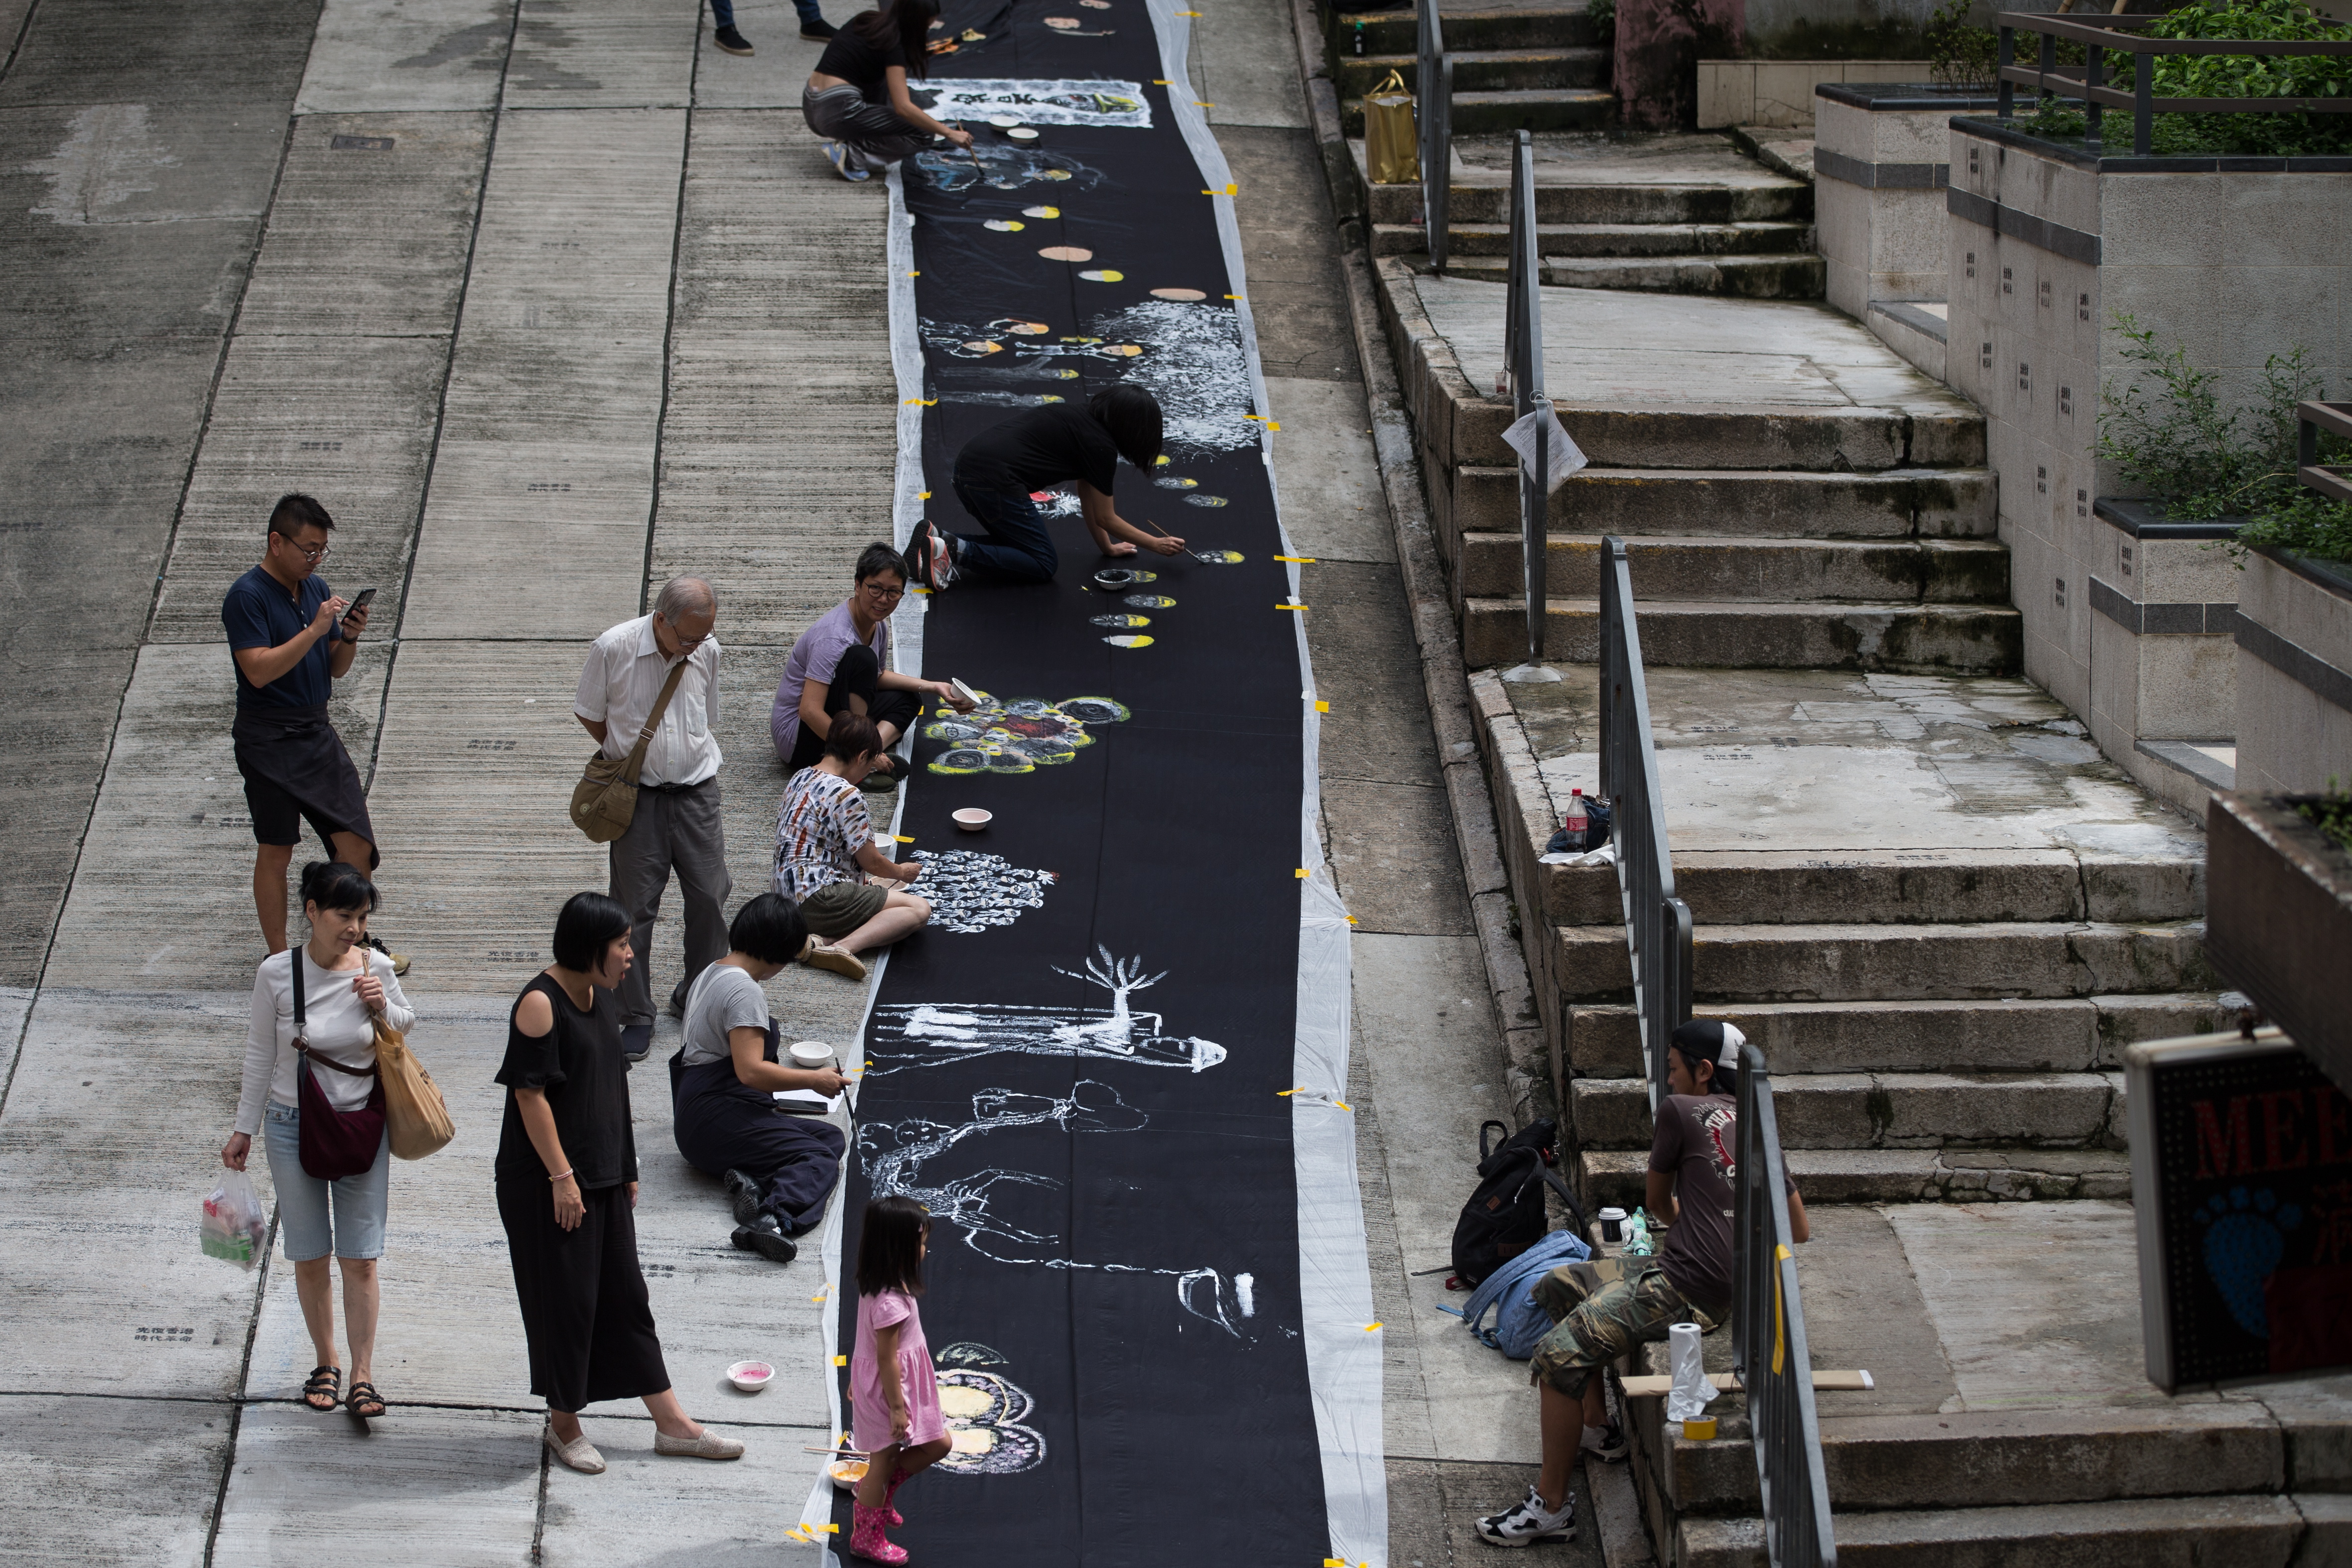 epa07803574 Local artists paint a canvas on the theme of recent protest in Hong Kong, China, 30 August 2019. Hong Kong has been gripped by mass protests since June 2019 over a now-suspended extradition bill that have morphed into an anti-government movement with no end in sight.  EPA/JEROME FAVRE